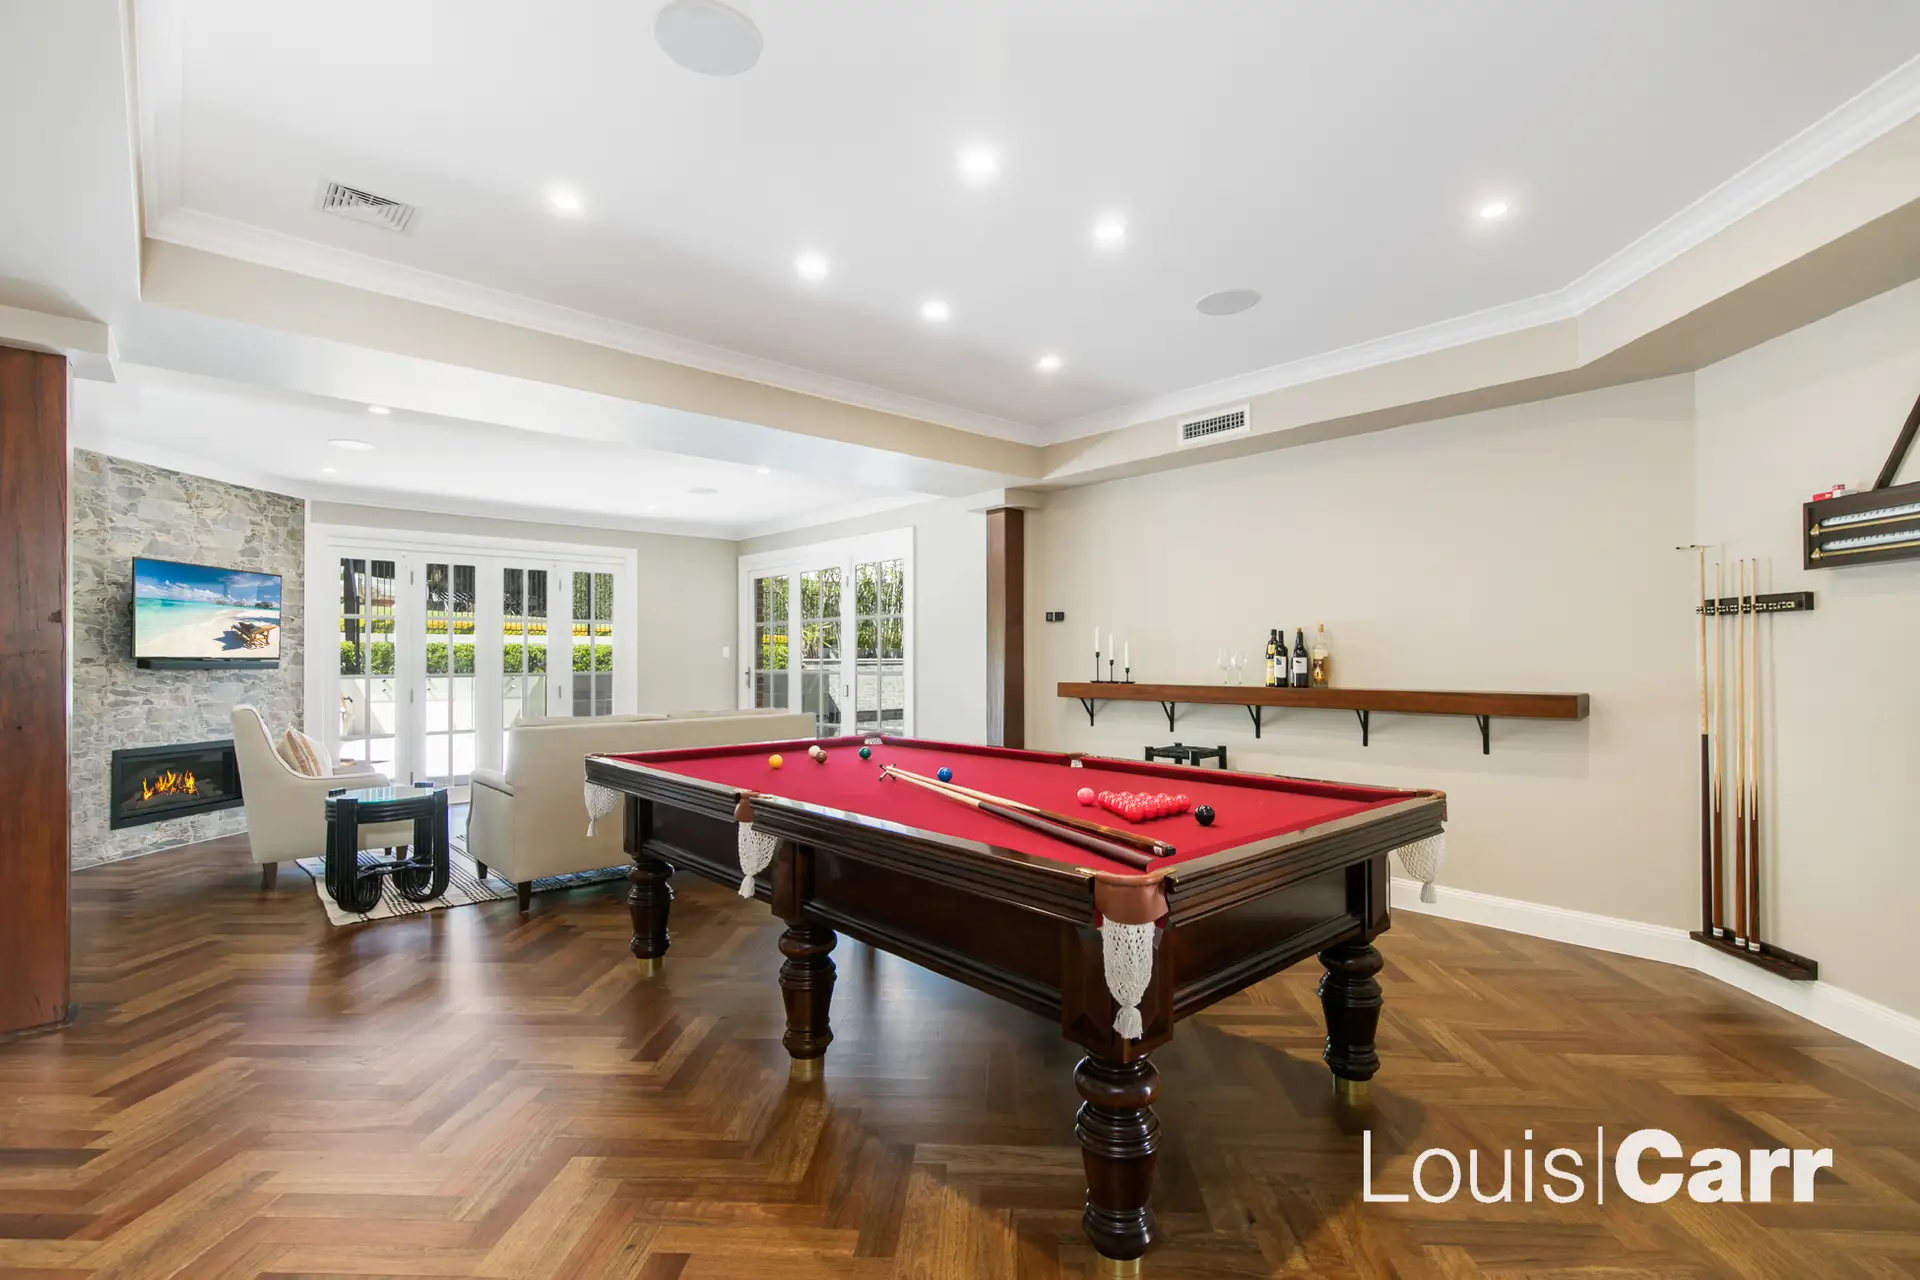 Photo #10: 23 Doris Hirst Place, West Pennant Hills - Sold by Louis Carr Real Estate